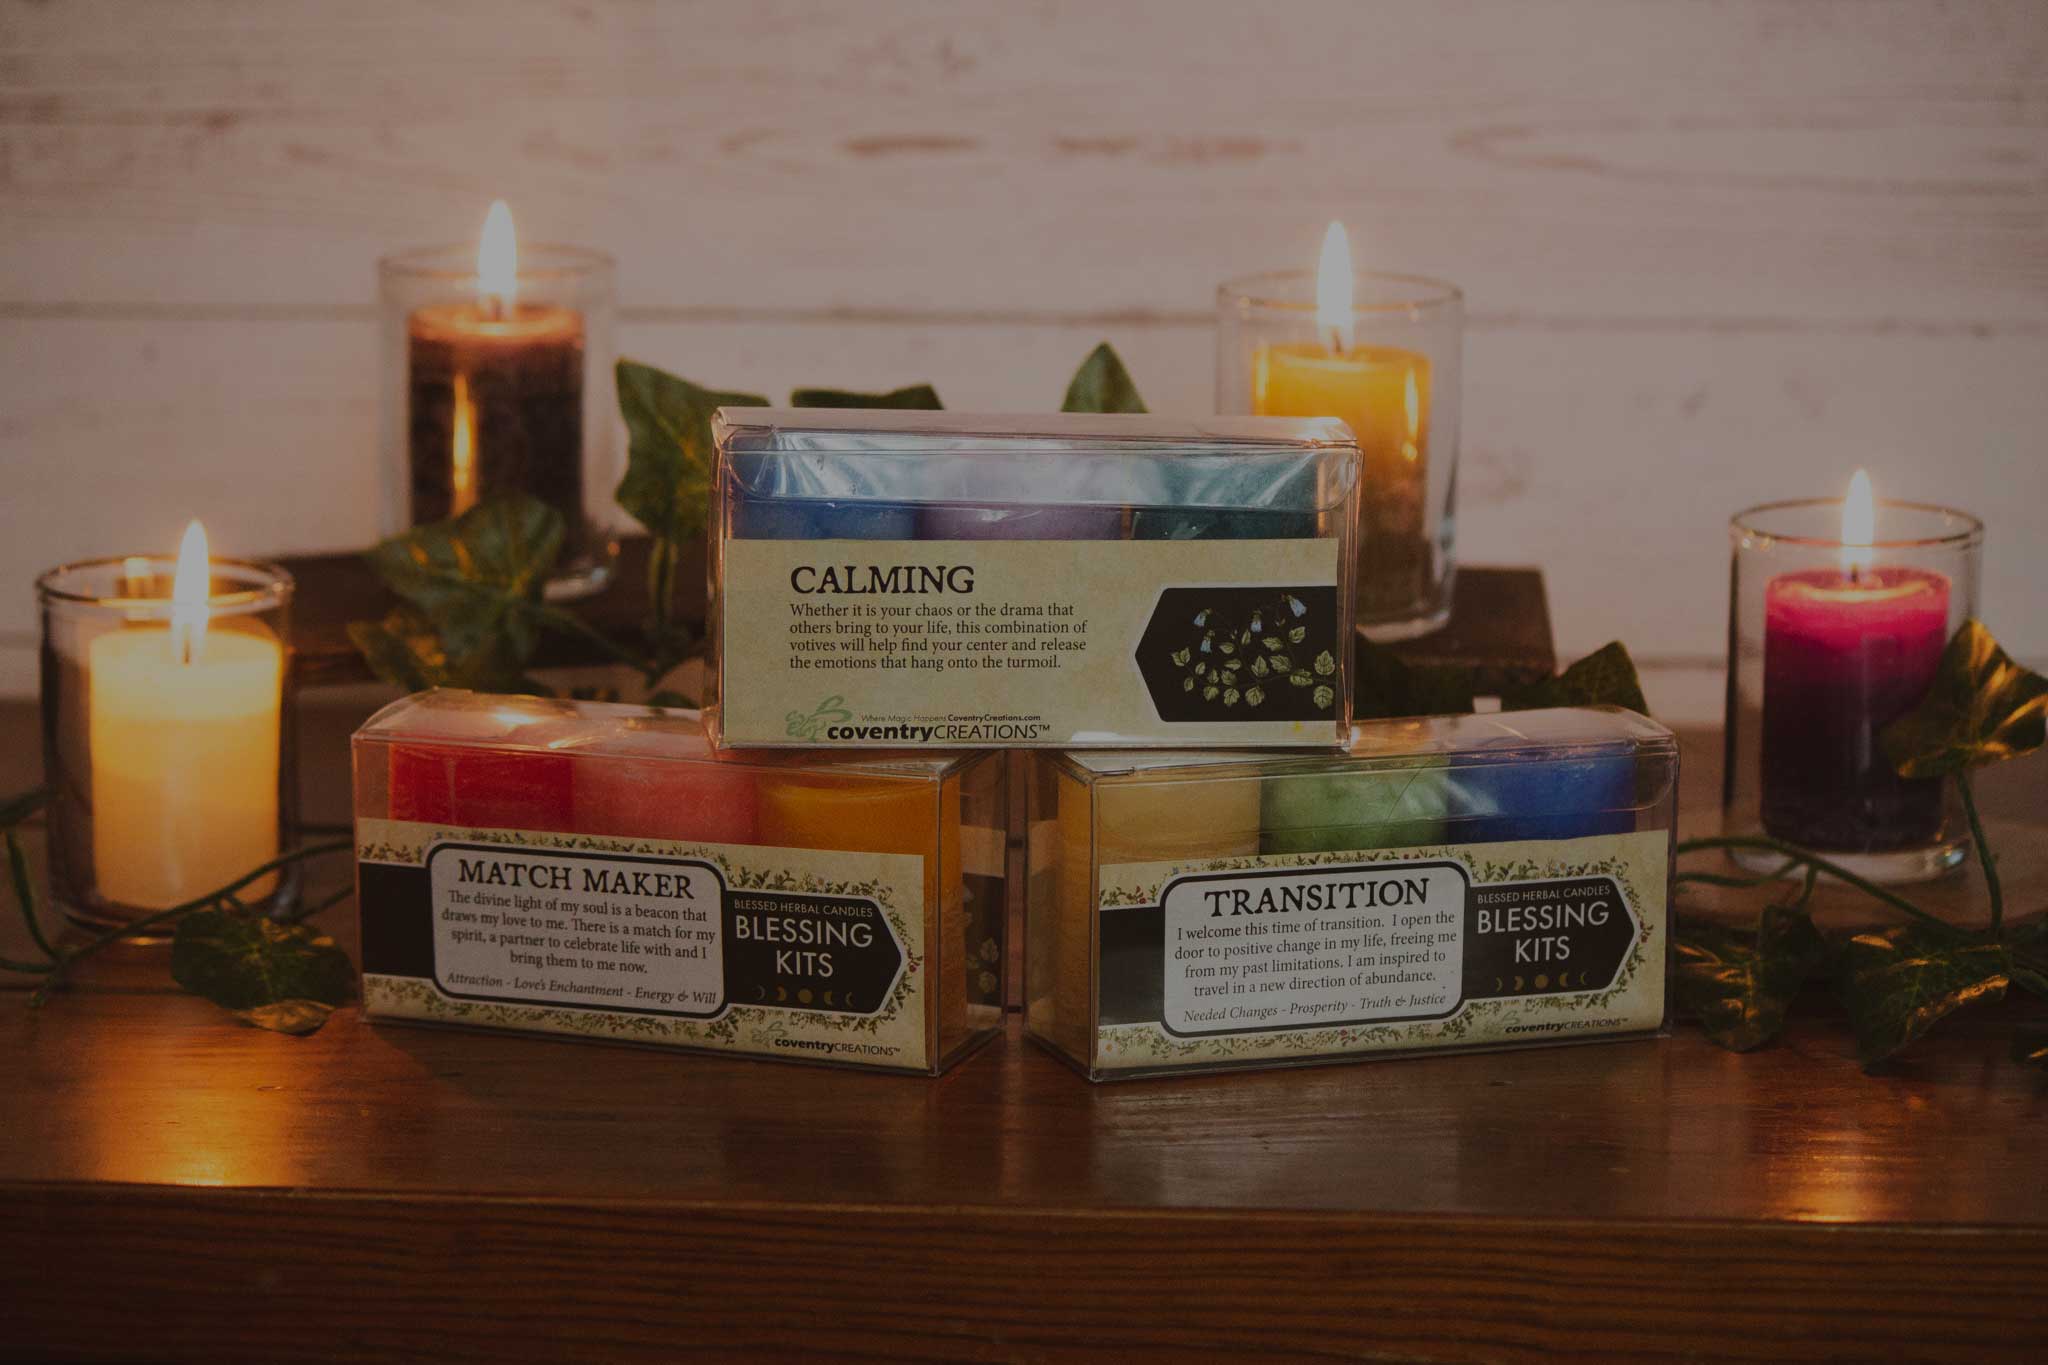 Coventry Creations Match Maker, Transition, Calming Blessing Kits with Votives lit